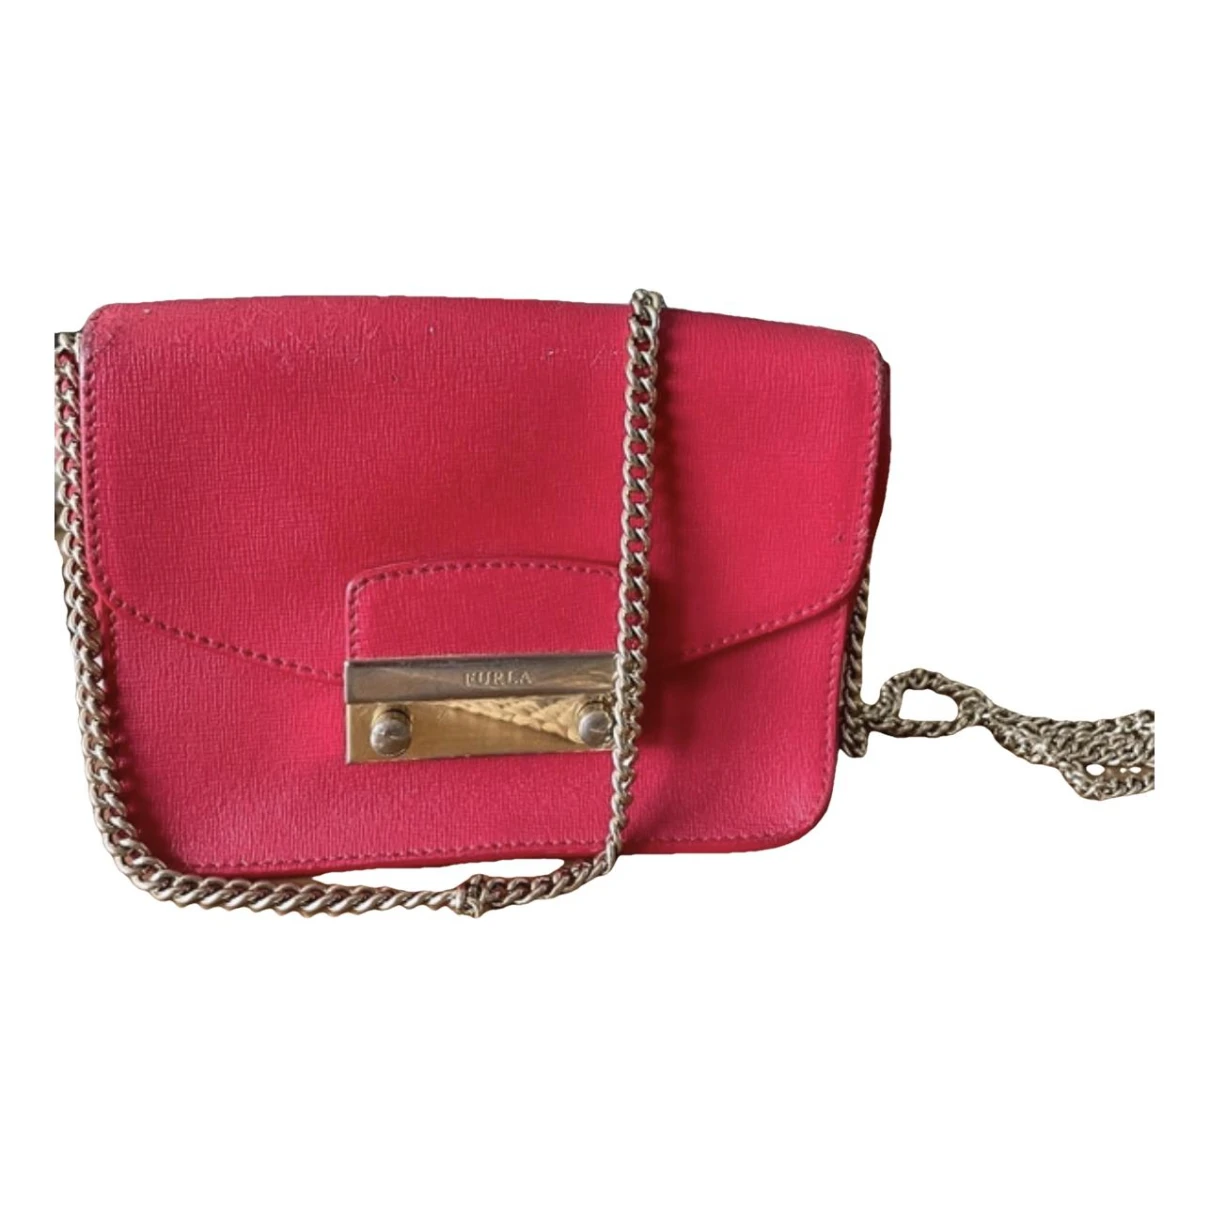 Pre-owned Furla Metropolis Leather Clutch Bag In Red